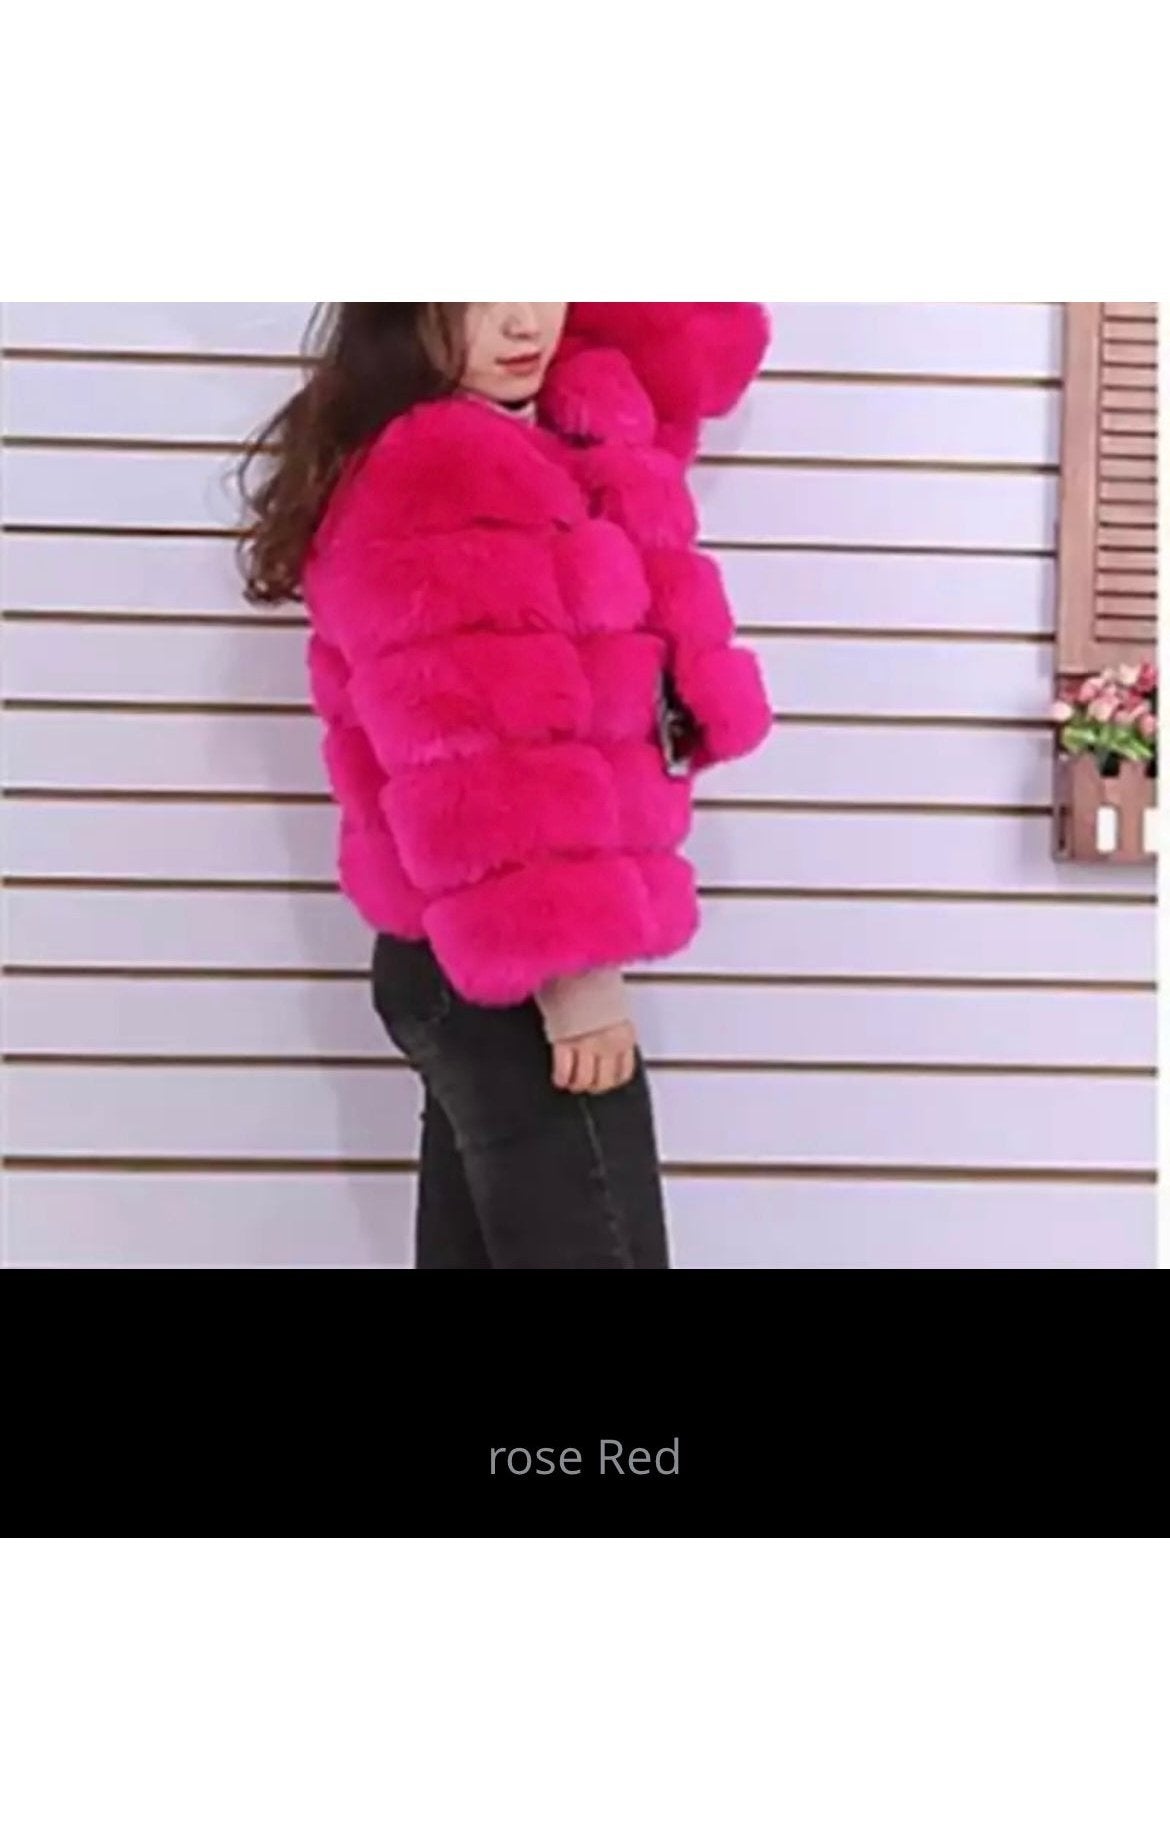 Ladies Fox Coat Natural Fur Winter stylish Plus Sizes Available ( Many COLORS) (Many Sizes)